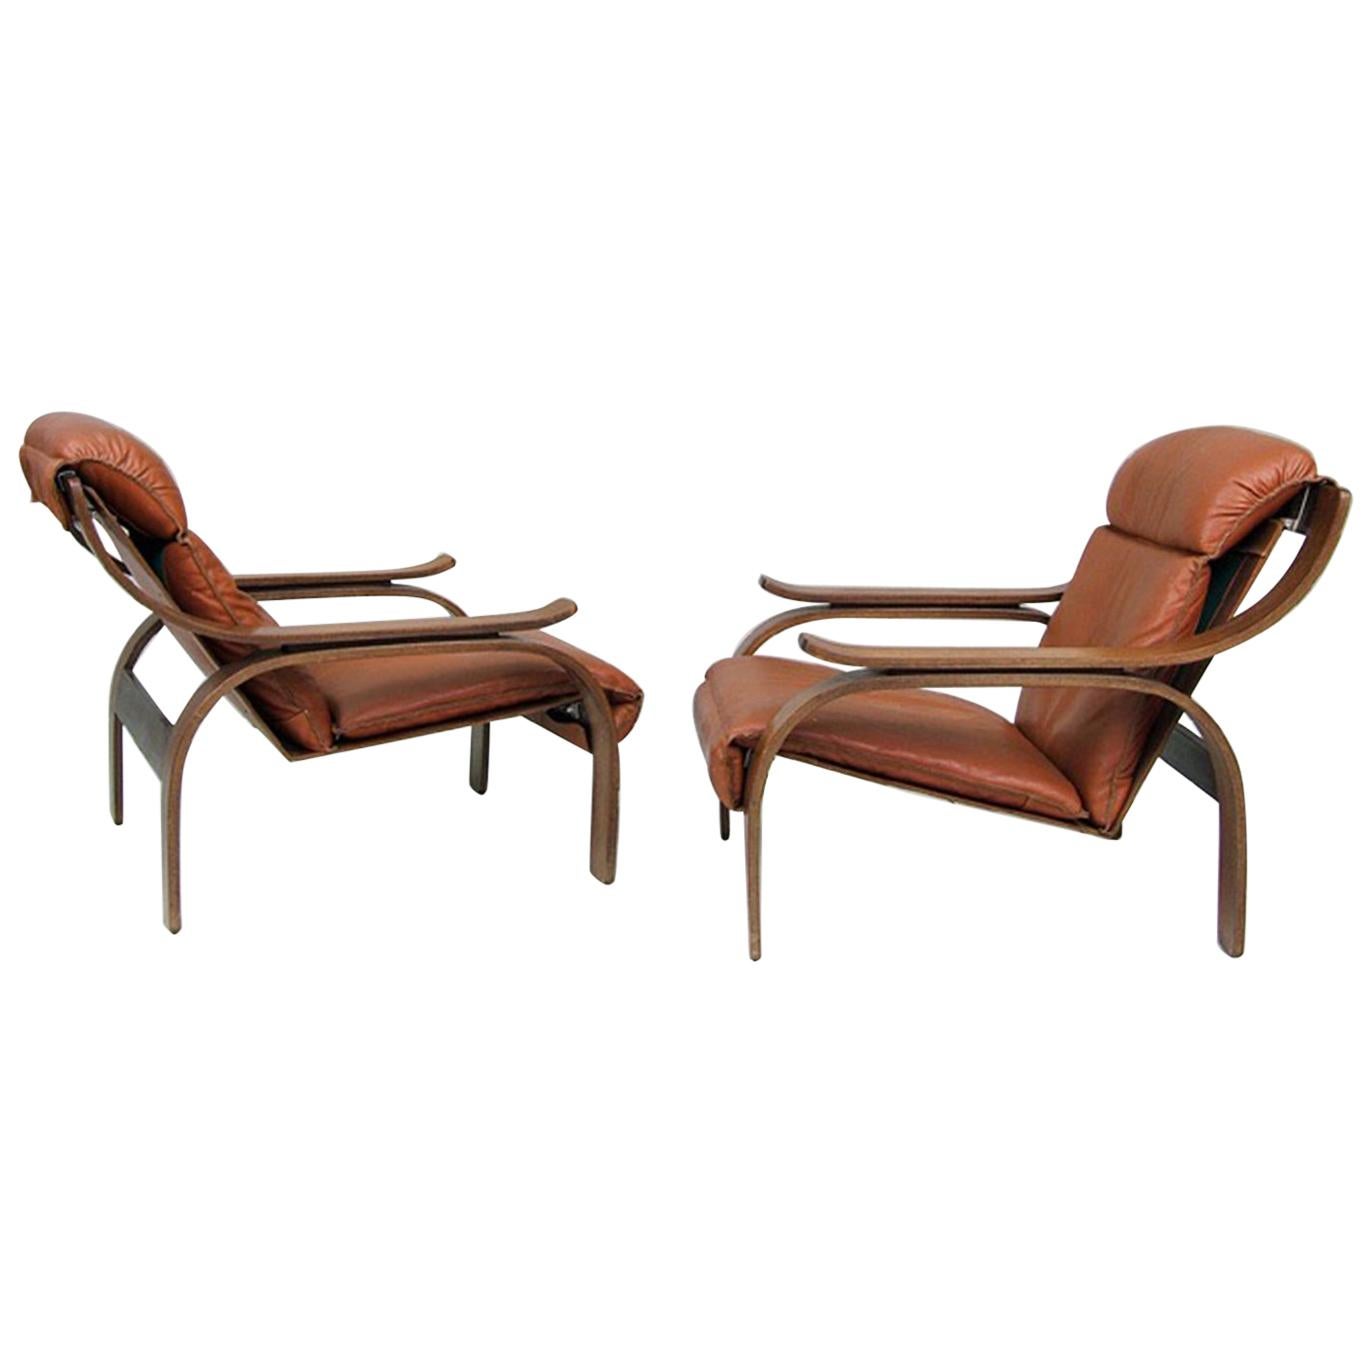 Pair of "Woodline" Cognac Leather Armchairs, by Marco Zanuso, Arflex, Italy 1964